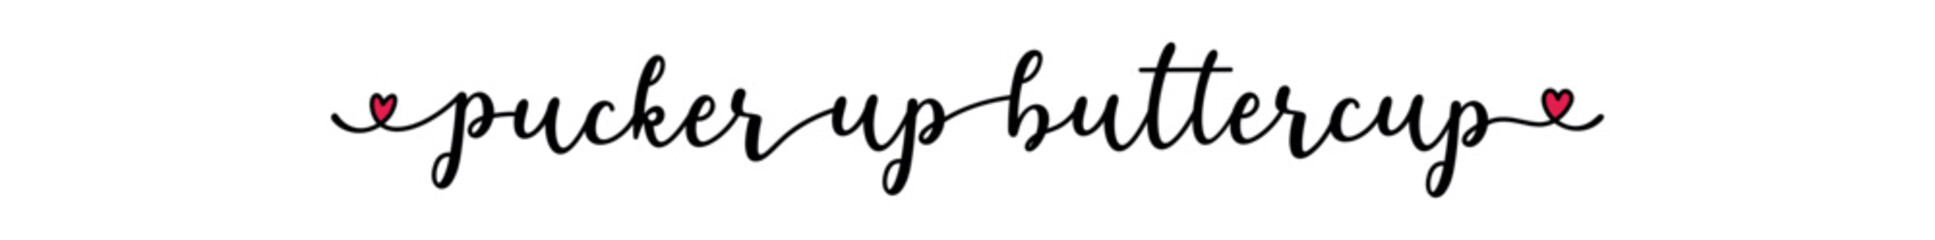 Pucker Up Buttercup quote as banner or logo, hand sketched. Funny Valentine's love phrase. Lettering for header, label, announcement, advertising, flyer, card, poster, gift.